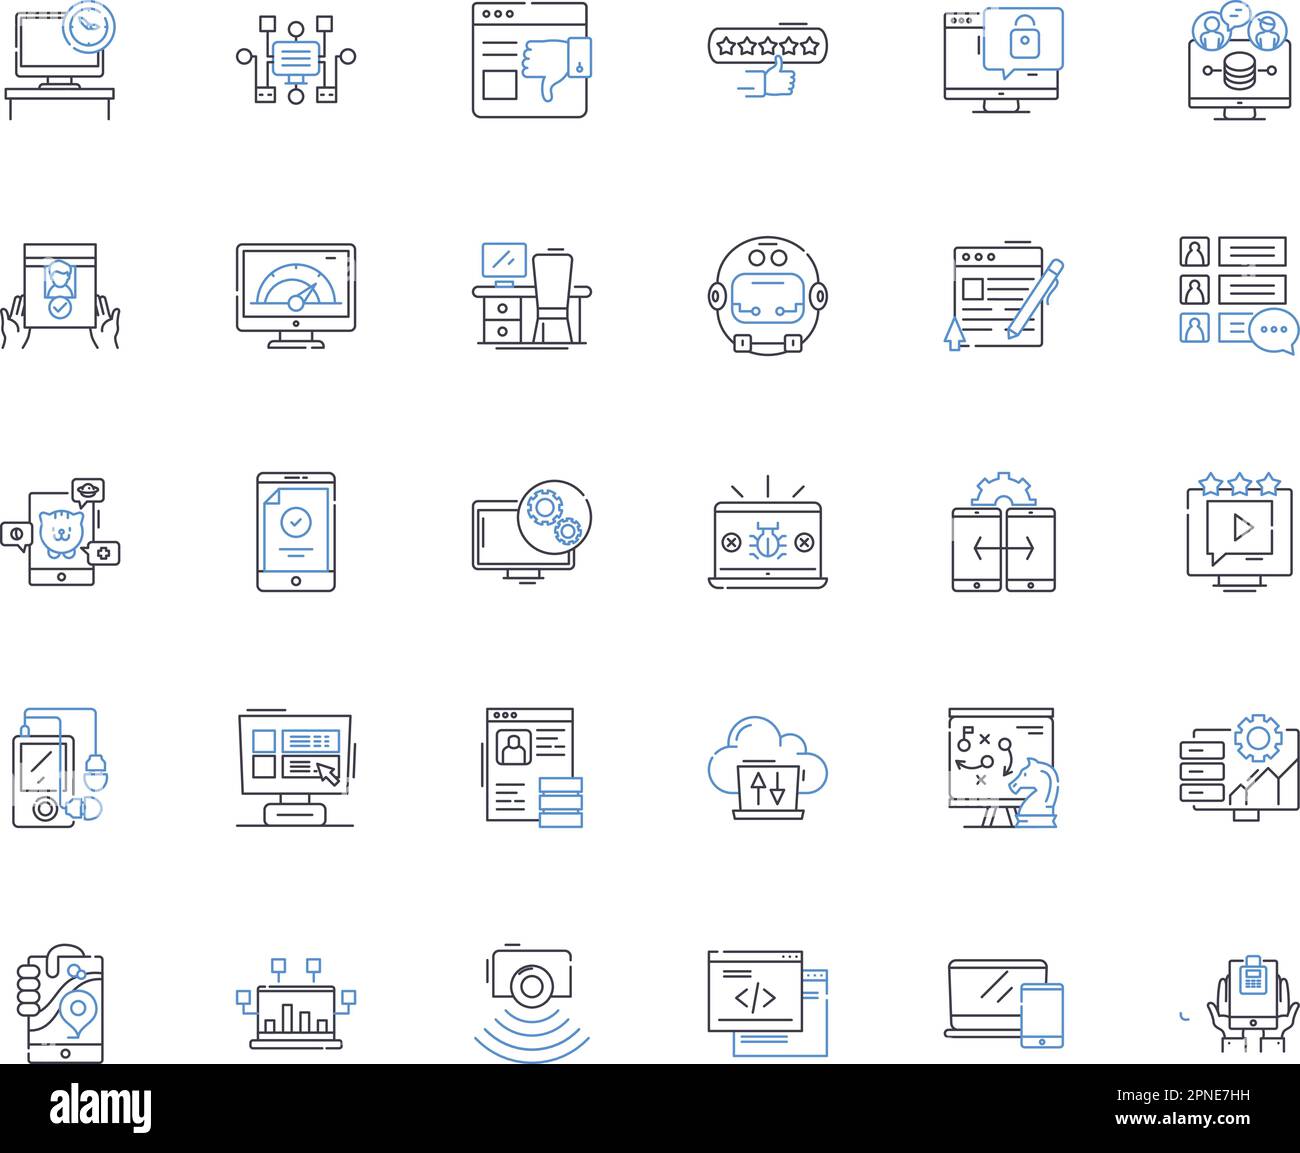 Appliance line icons collection. Microwave, Refrigerator, Stove, Oven, Dishwasher, Blender, Toaster vector and linear illustration. Coffee maker Stock Vector